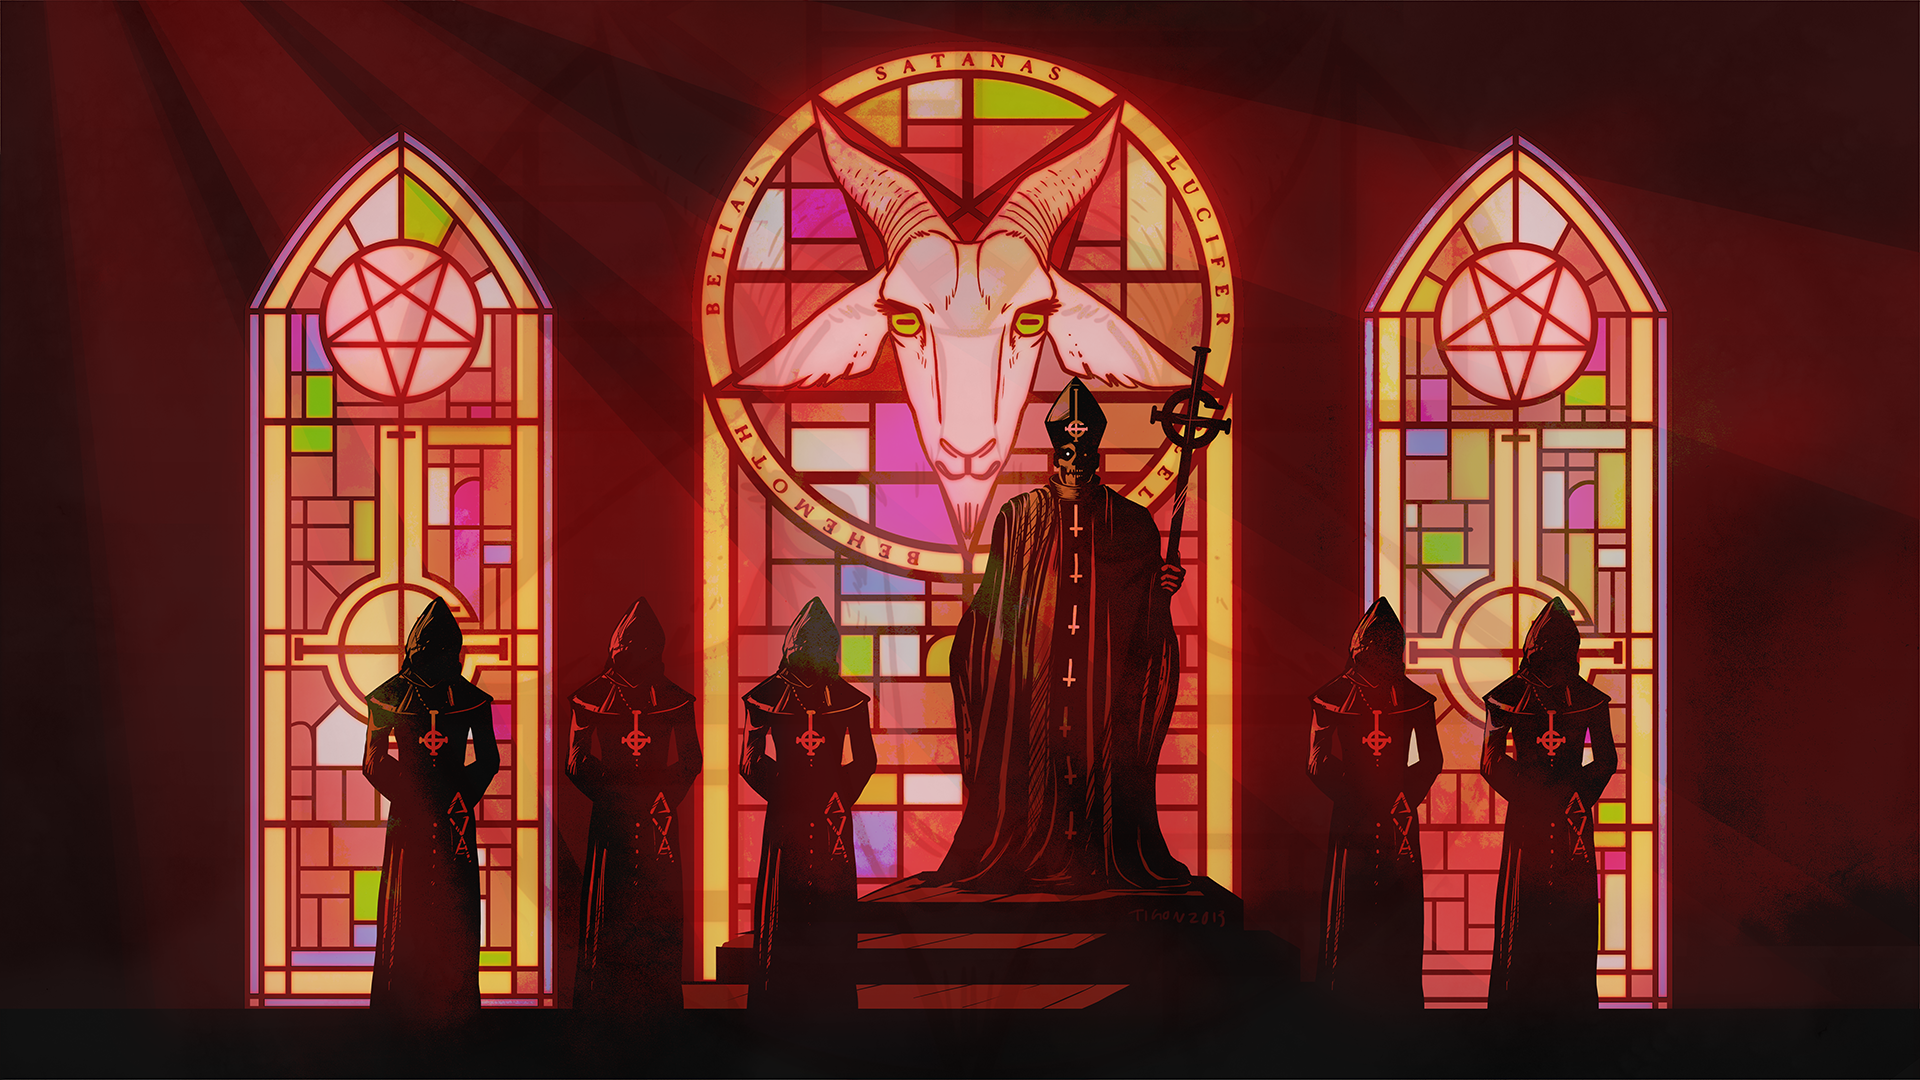 Lucifer Church Papa Emeritus Ghost Ghost B C Red Stained Glass Artwork Goat Pentagram 1920x1080